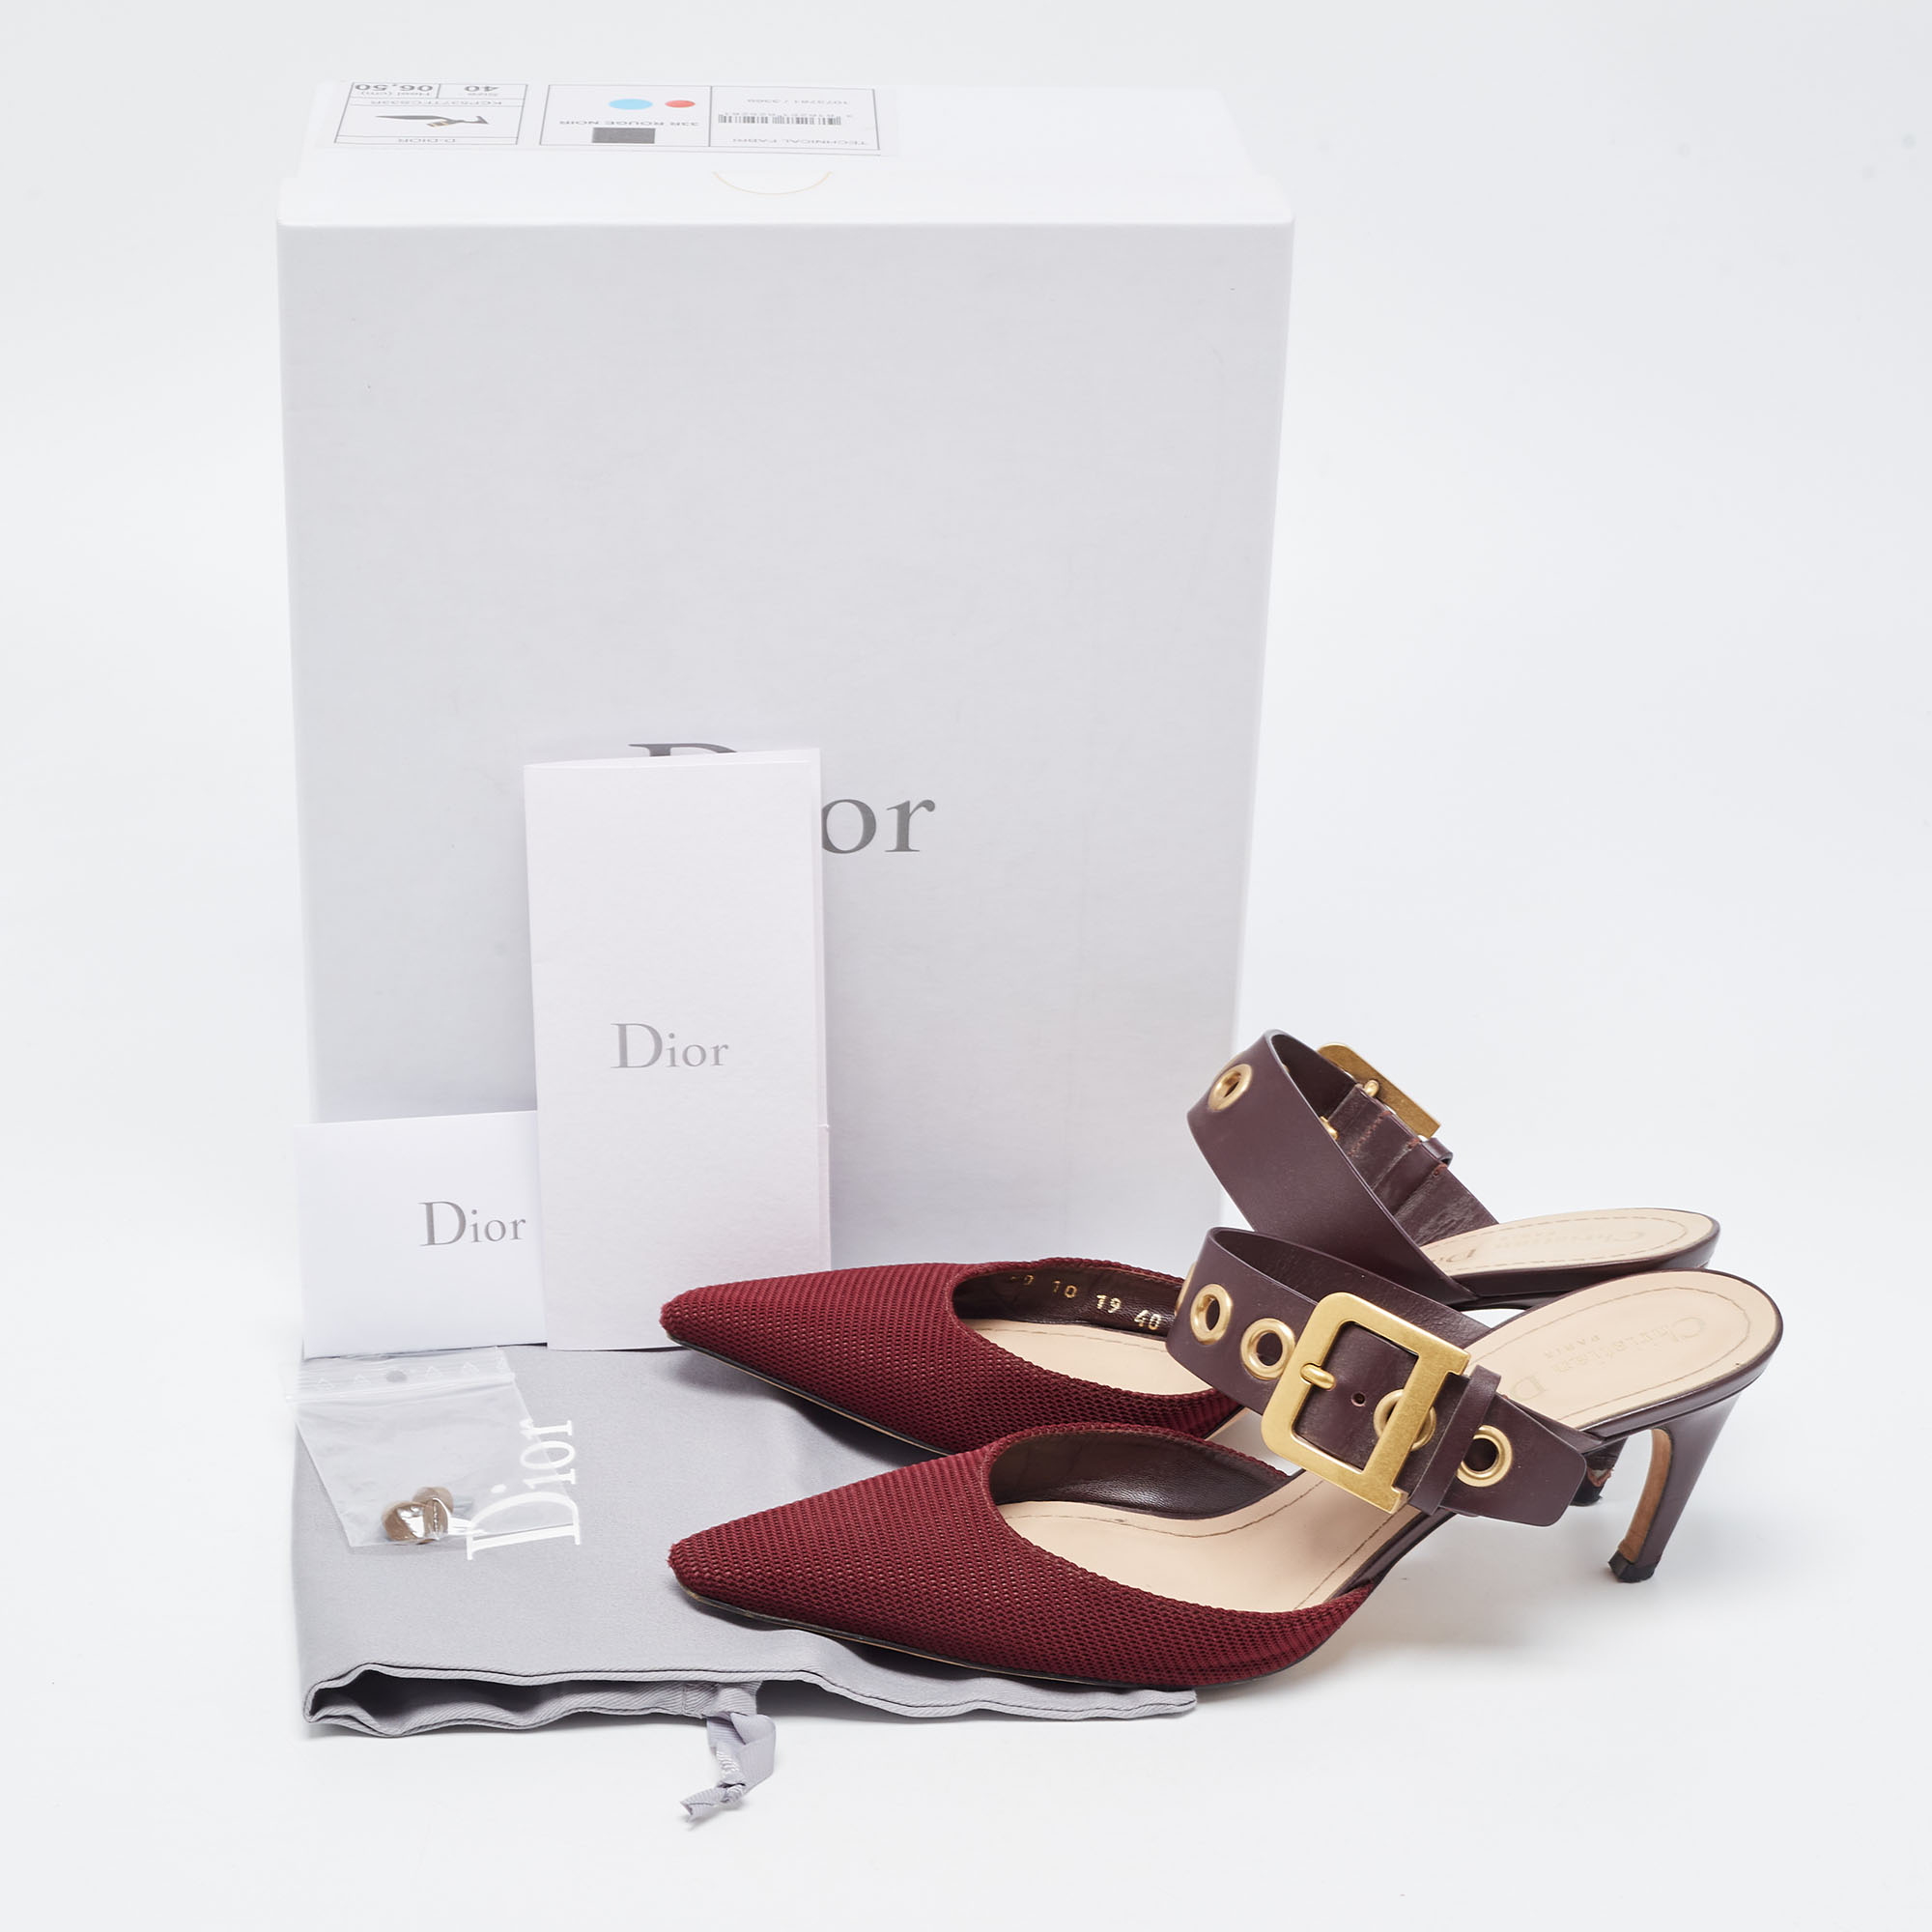 Dior Burgundy Leather And Mesh D Dior Buckle Mule Sandals Size 40